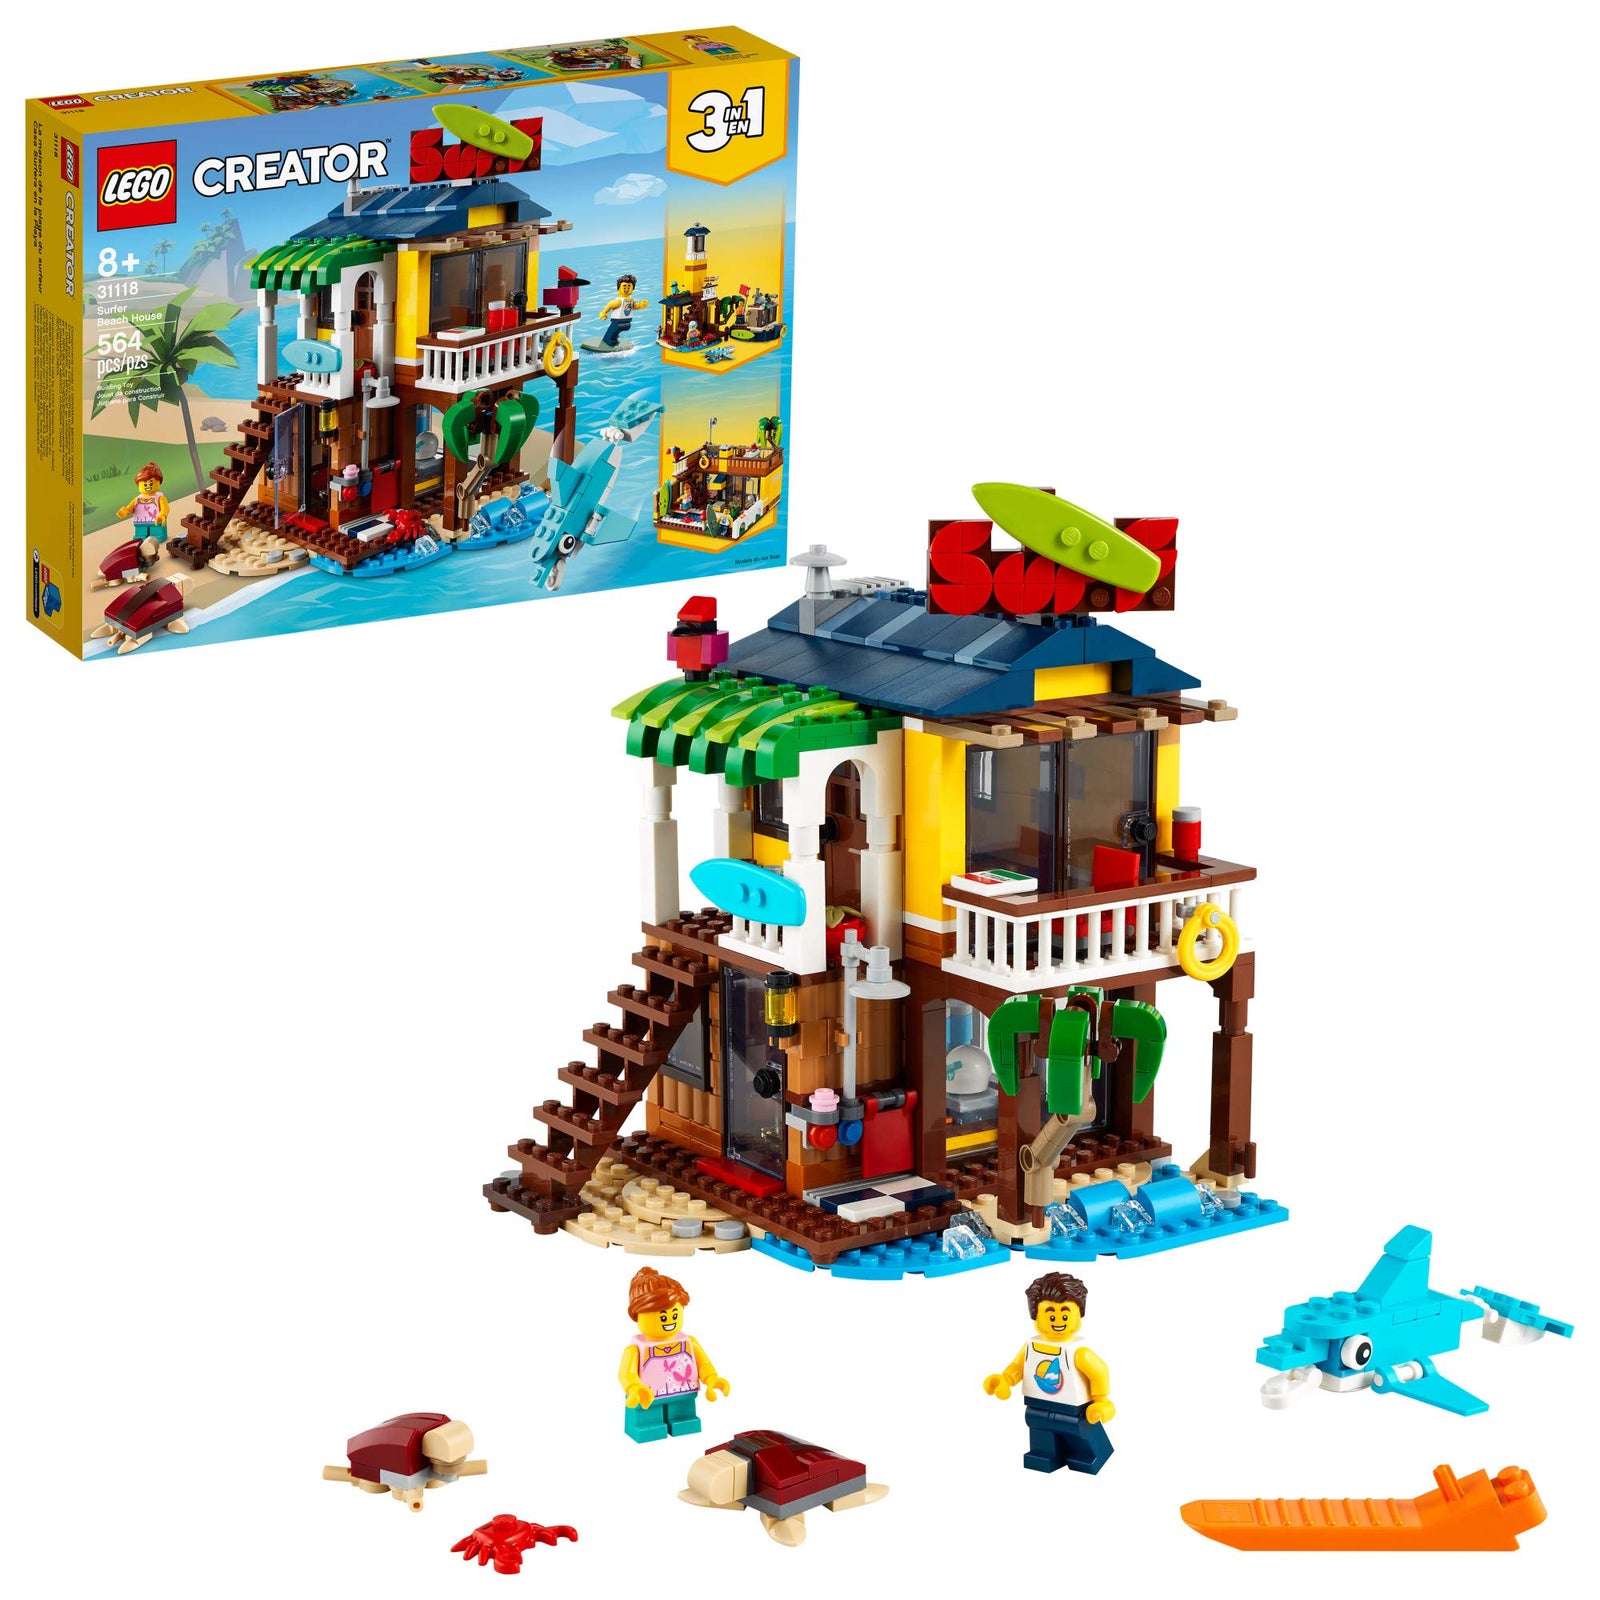 LEGO Creator 3in1 Surfer Beach House 31118 Building Kit Featuring Beach Hut and Animal Toys, New 2021 (564 Pieces)